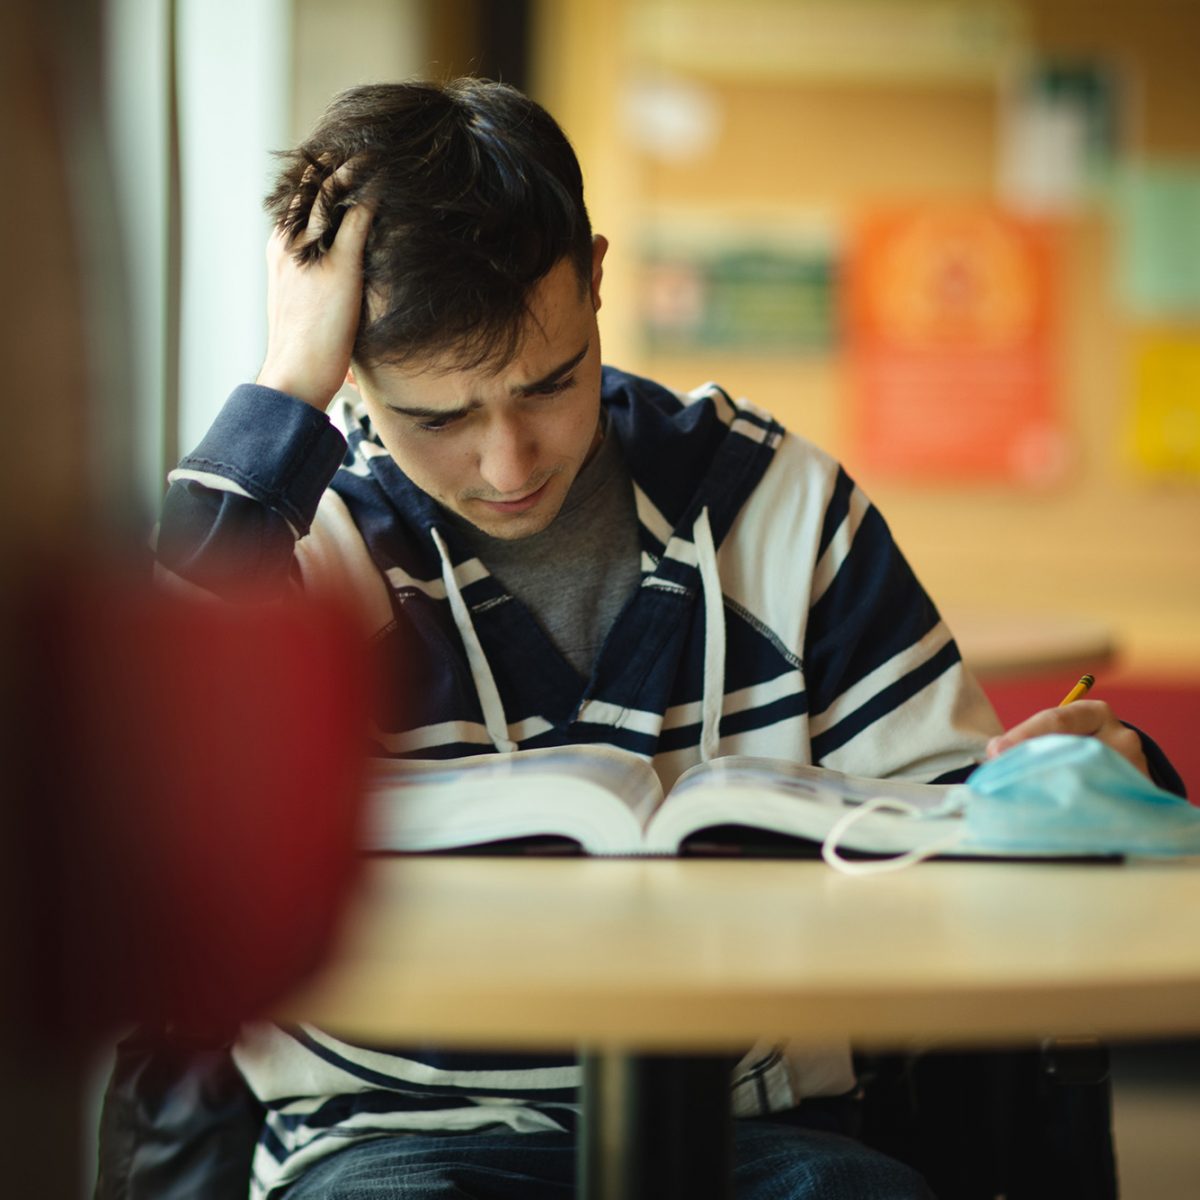 Mental Health of College Students Is Getting Worse The Brink Boston University